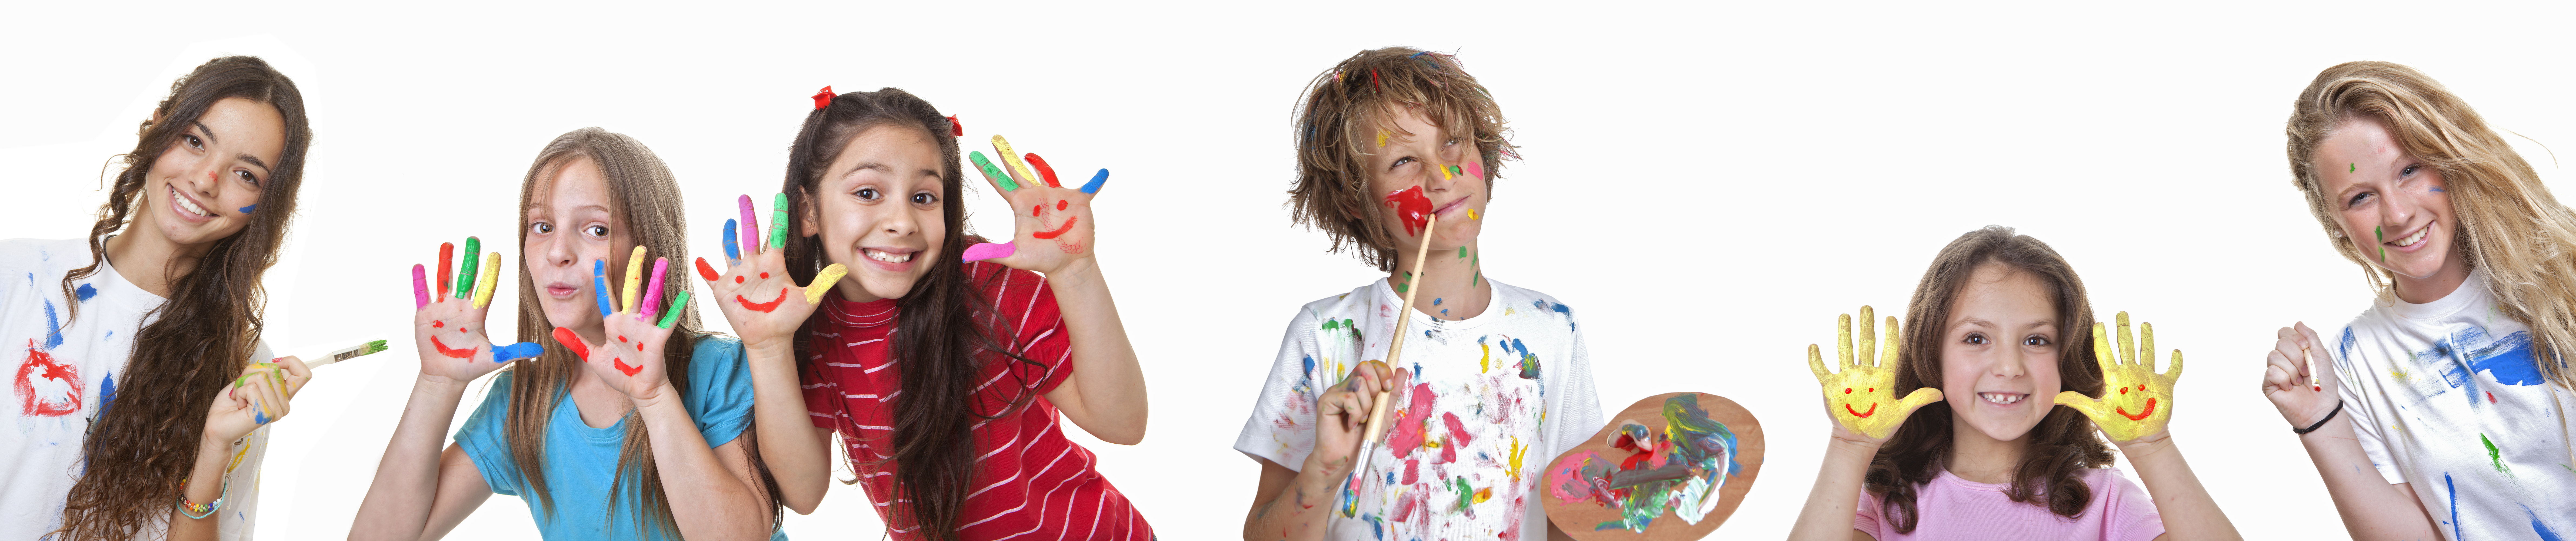 Family Activity Night header showing six children with paint splatters and paint on hands